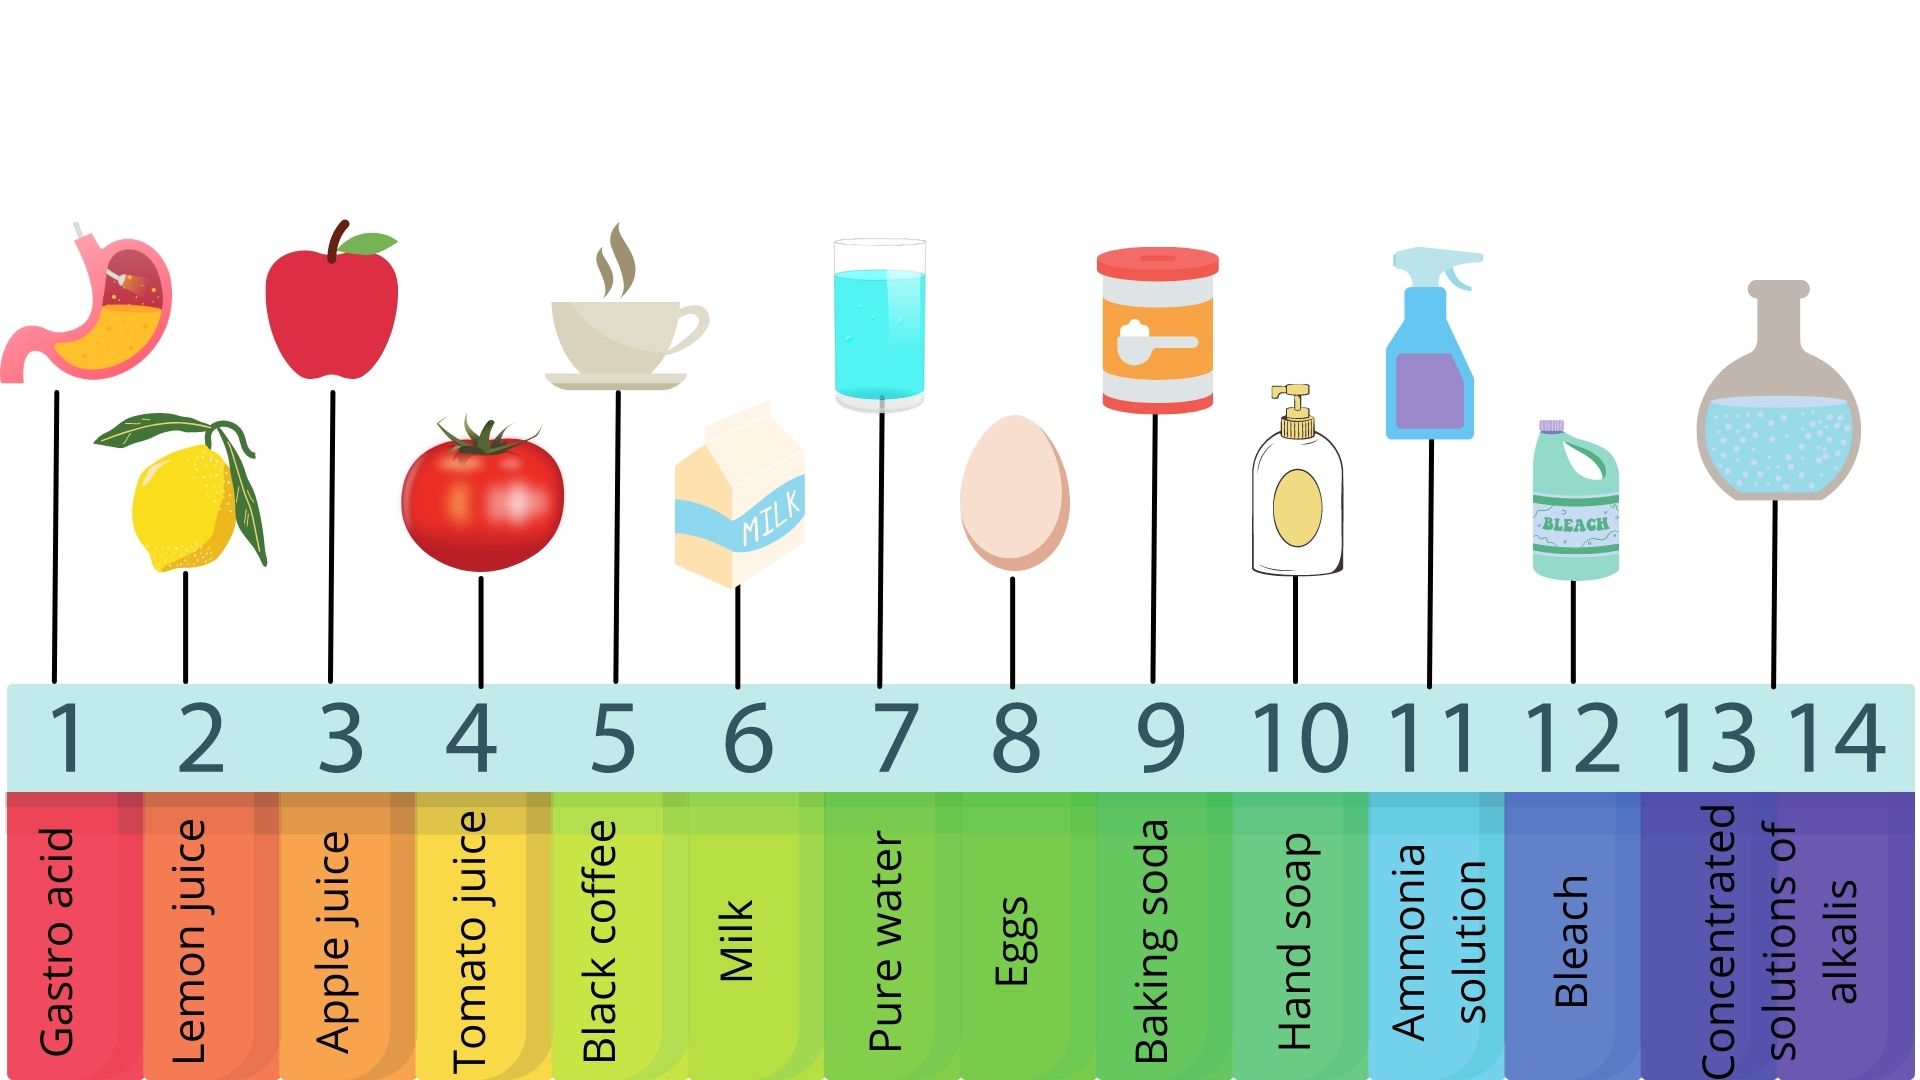 A graphic of a pH scale. Each number on the scale has an associated everyday food or chemical associated with it. Each number also has a cartoon image. The scale is a rainbow, with 1 (most acidic) being red and 14 (most basic) being dark purple. The graphic reads: 1 - Gastro acid (associated cartoon image: a stomach); 2 - lemon juice (associated cartoon image: a lemon); 3 - apple juice (associated cartoon image: an apple); 4 - tomato juice (associated cartoon image: a tomato); 5 - black coffee (associated cartoon image: a steaming mug); 6 - milk (associated cartoon image: a white milk carton); 7 - pure water (associated cartoon image: a glass of water); 8 - eggs (associated cartoon image: an egg); 9 - baking soda (associated cartoon image: a white cannister with a red top and bottom and an orange label); 10 - hand soap (associated cartoon image: a white bottle with yellow label and a pump); 11 - ammonia solution (associated cartoon image: a blue spray bottle with a purple label); 12 - bleach (associated cartoon image: a turquoise bottle with a label that reads "bleach"); 13&14 - concentrated solutions of alkalis (associated cartoon image: a round bottom beaker filled with a bubbly light blue solution)